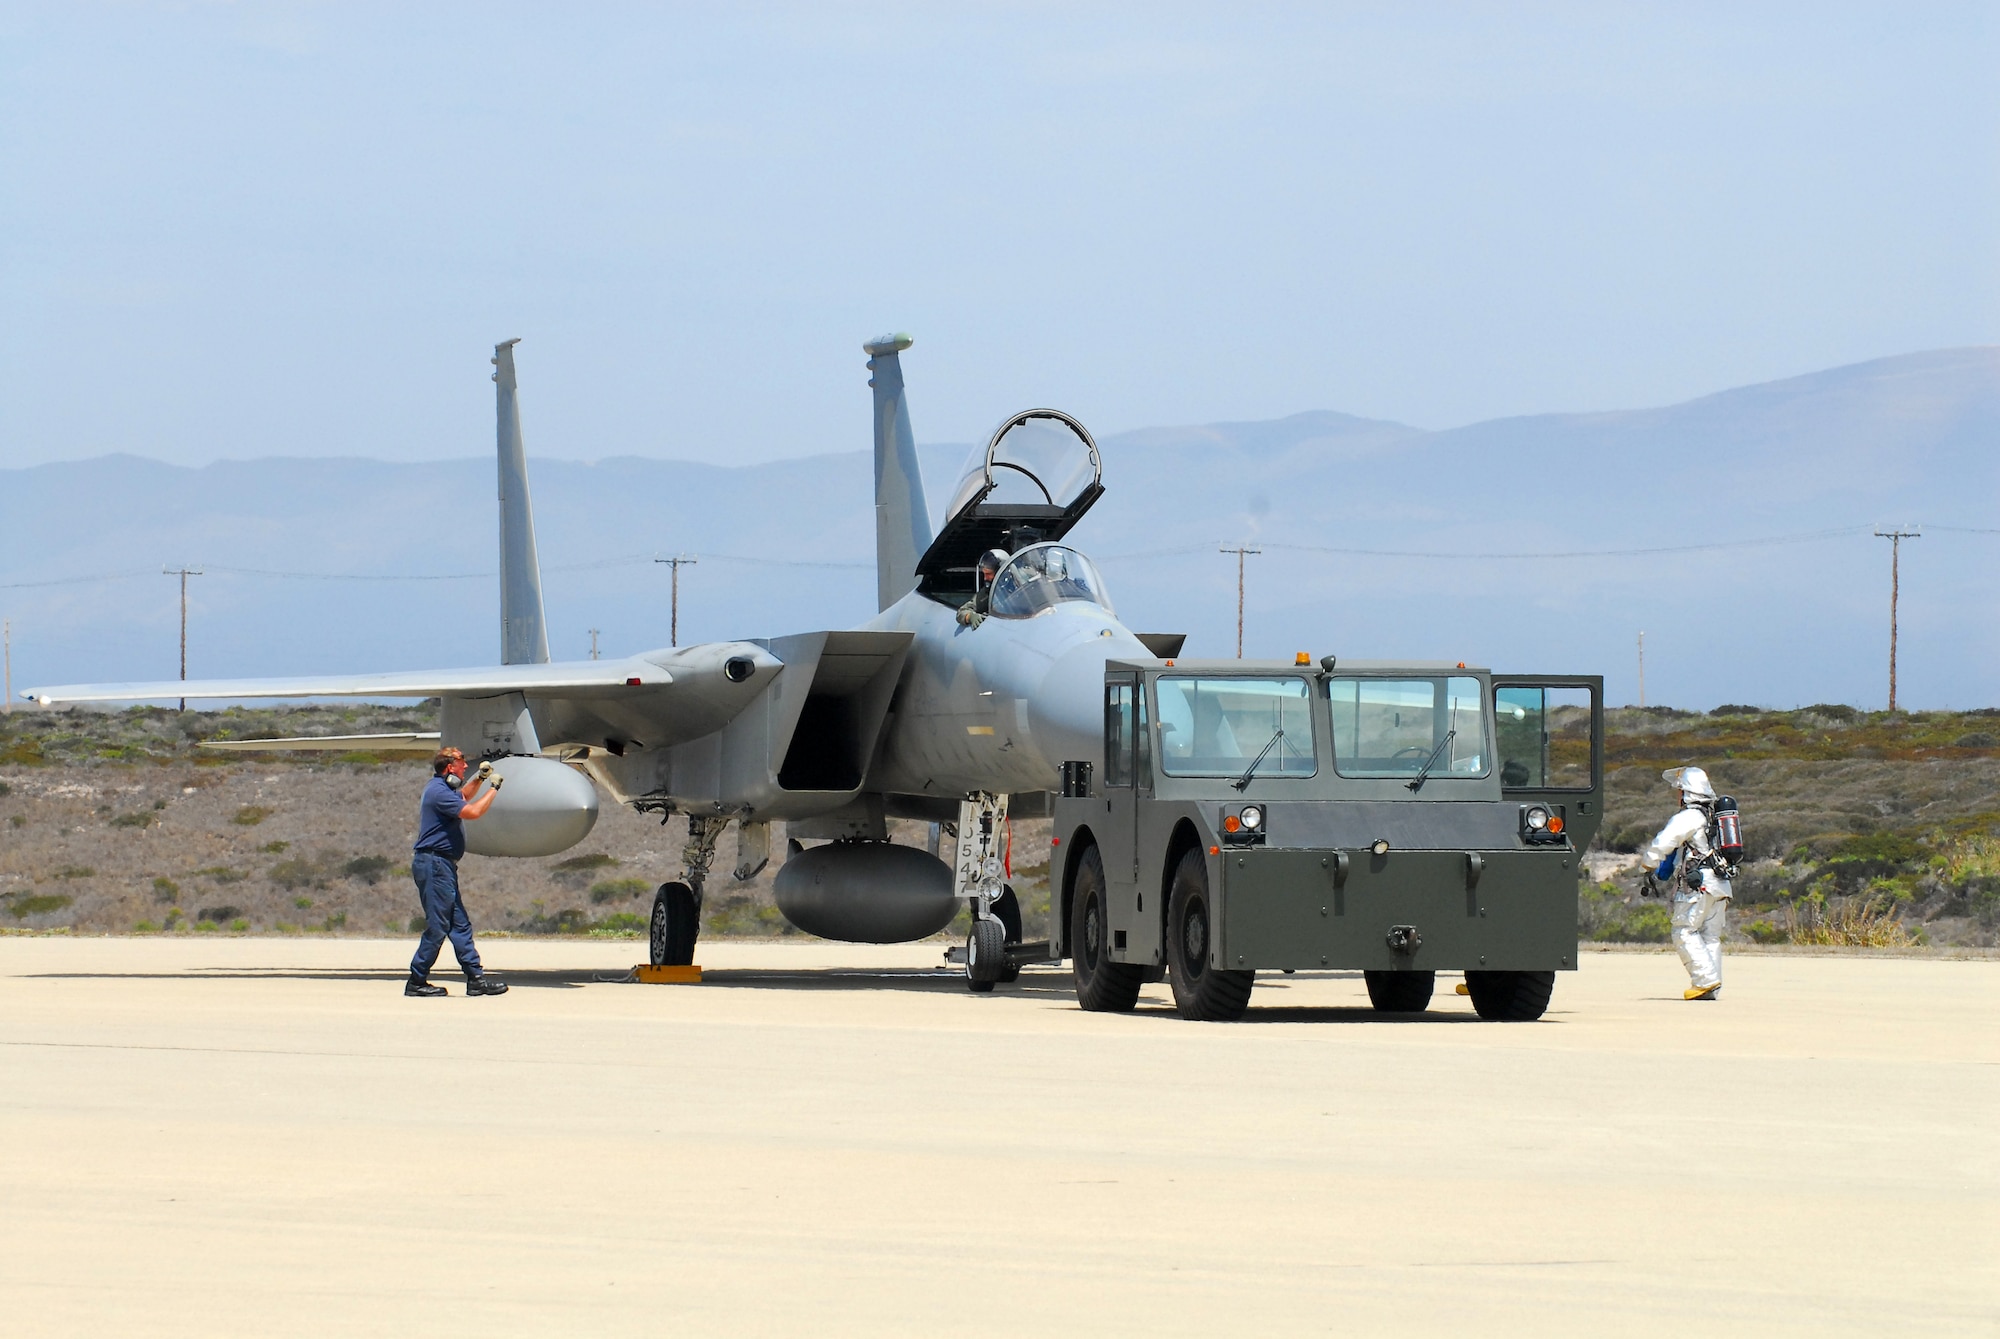 VANDENBERG AIR FORCE BASE, Calif. -- Airfield operators and Firefighters in flightline fire suits respond to an F-15A Eagle that landed on Vandenberg's flight line Aug. 30 due to operational difficulties. (U.S. Air Force photo/Airman 1st Class Robert Lewis)